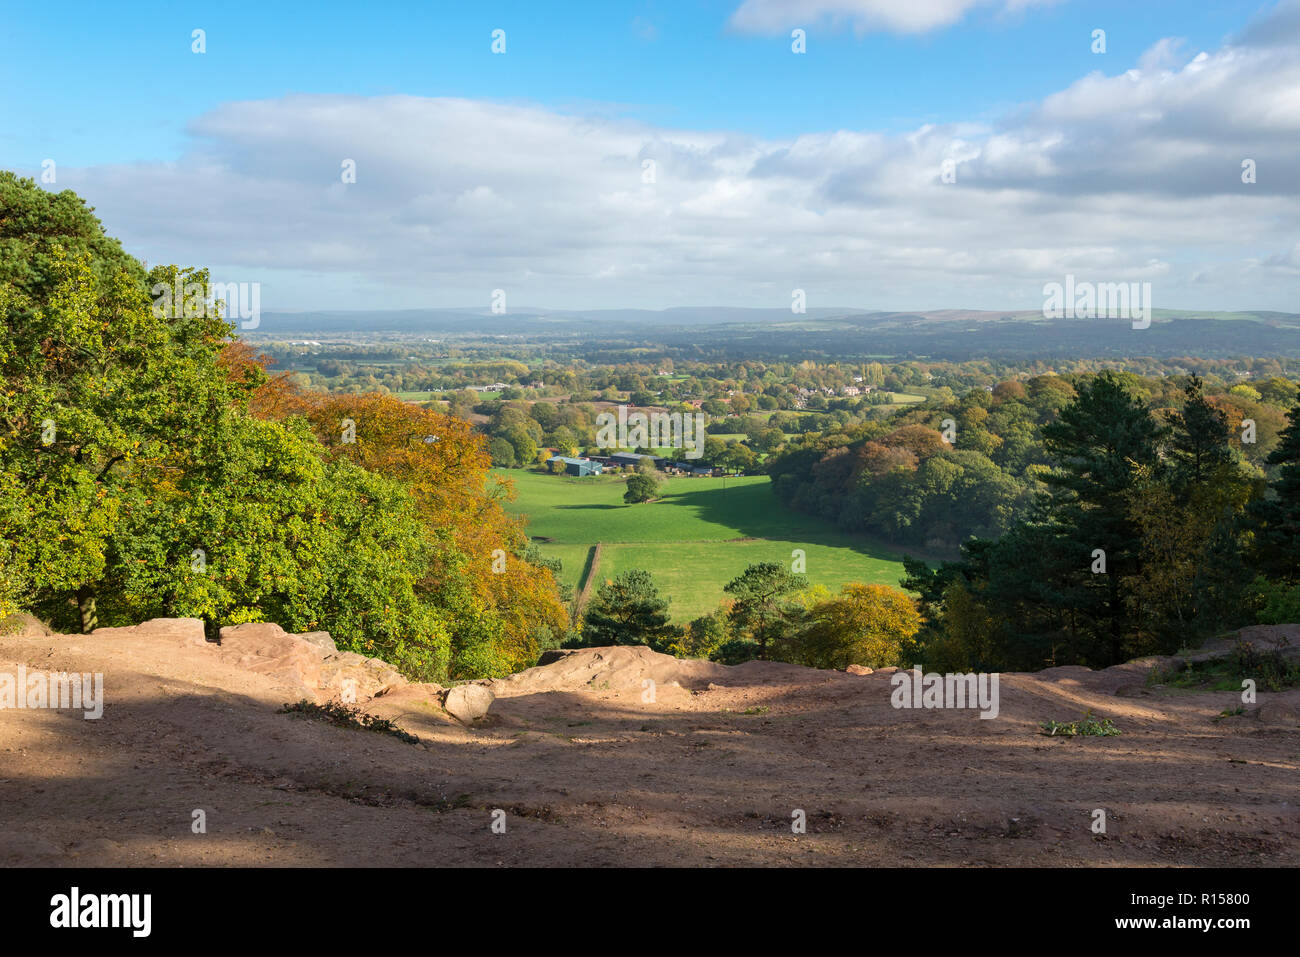 Beautiful view of Cheshire countryside from Stormy Point, Alderley Edge, Cheshire, England. Stock Photo